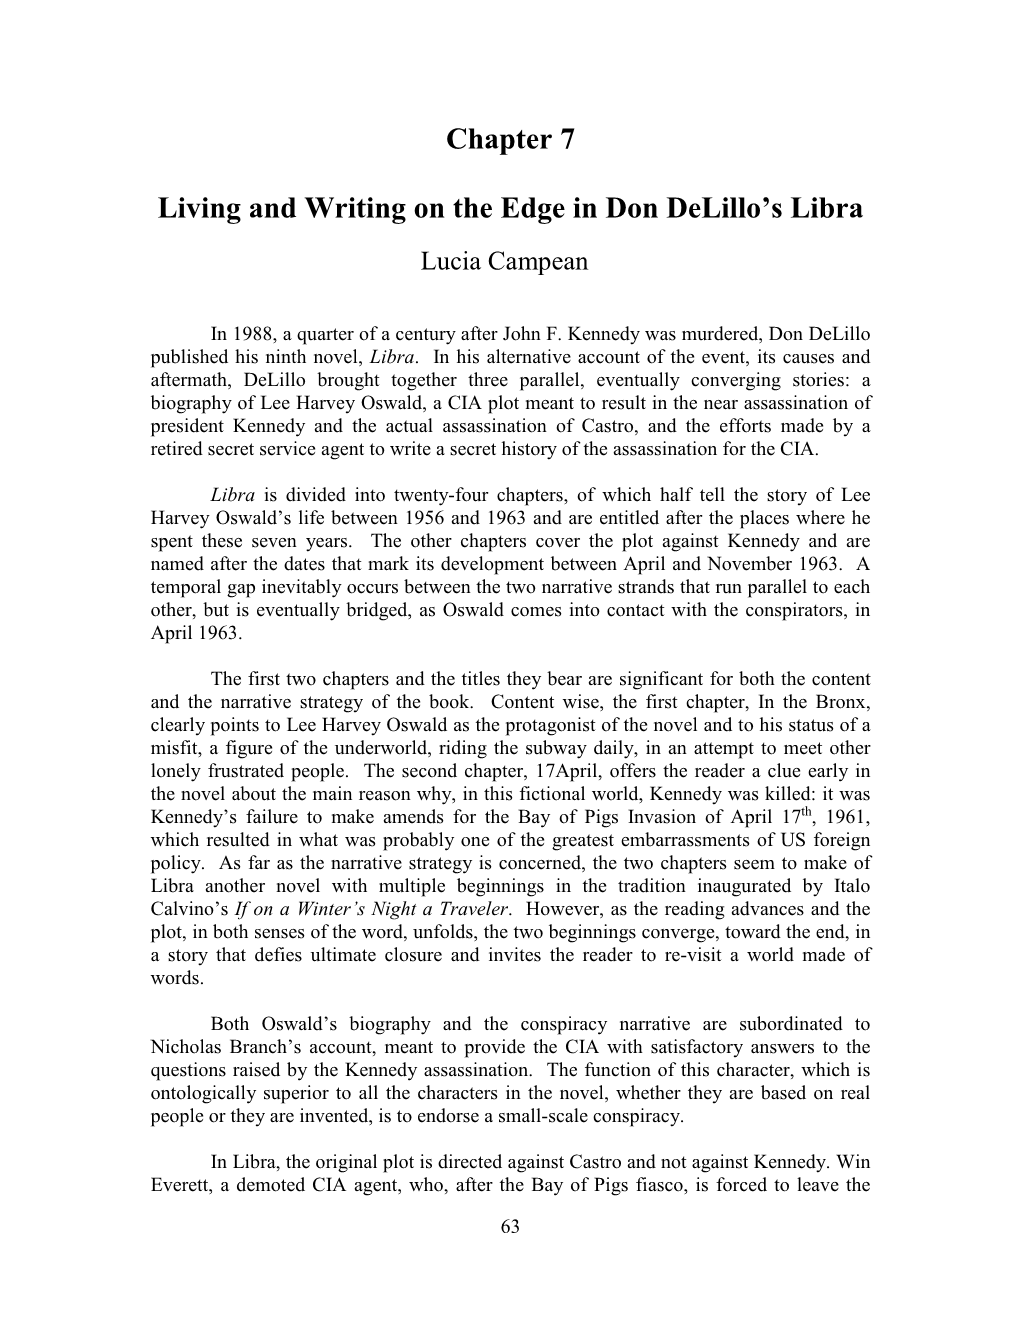 Chapter 7 Living and Writing on the Edge in Don Delillo's Libra